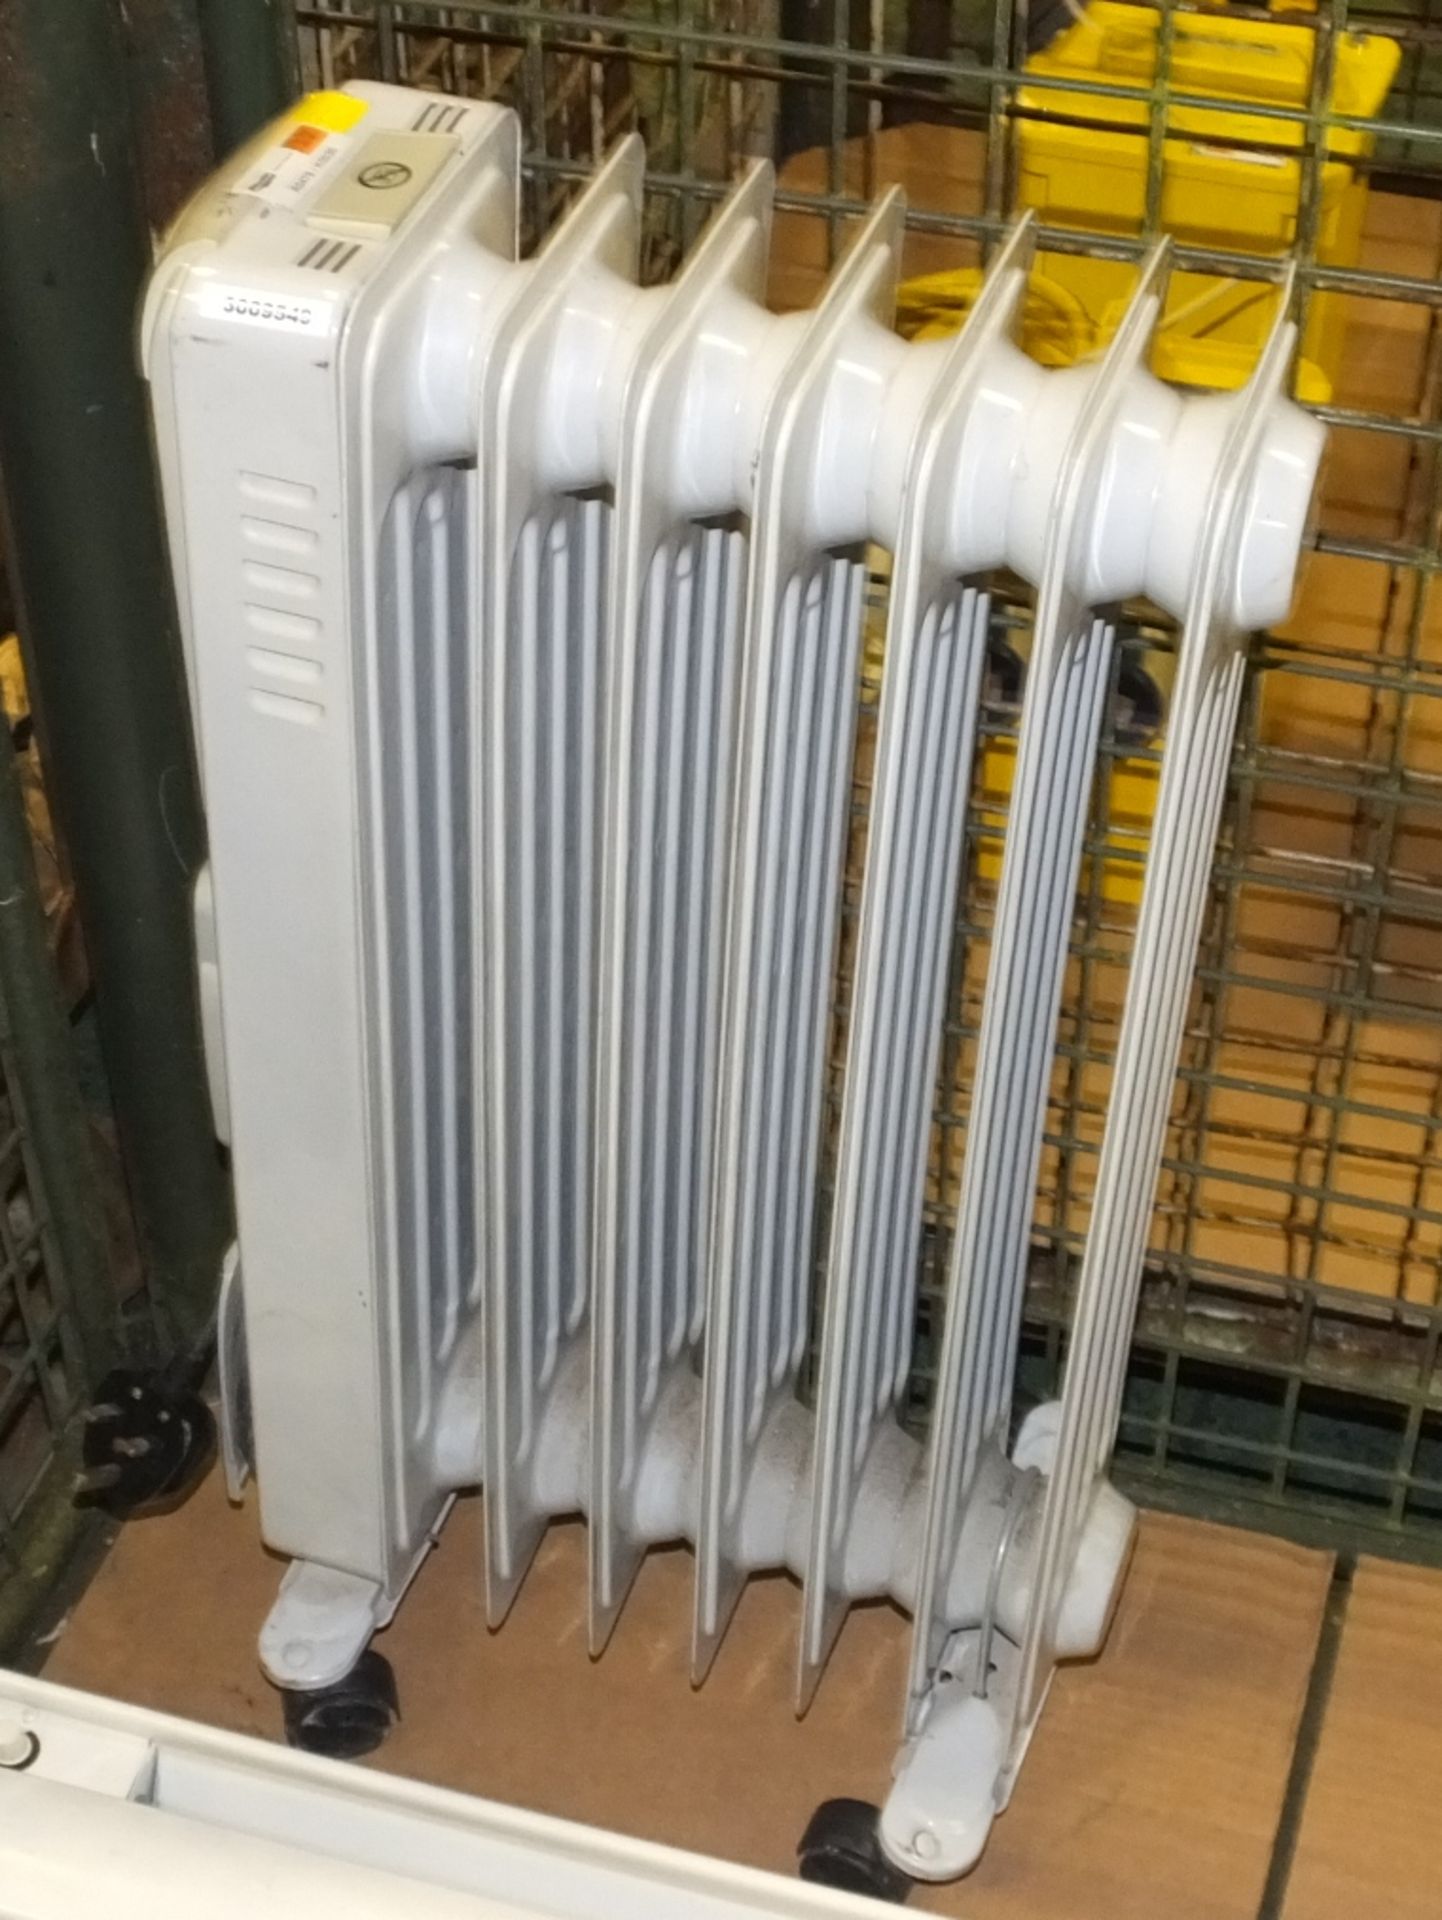 Domestic Electric Fans, Heater, Extension Leads - Image 2 of 5